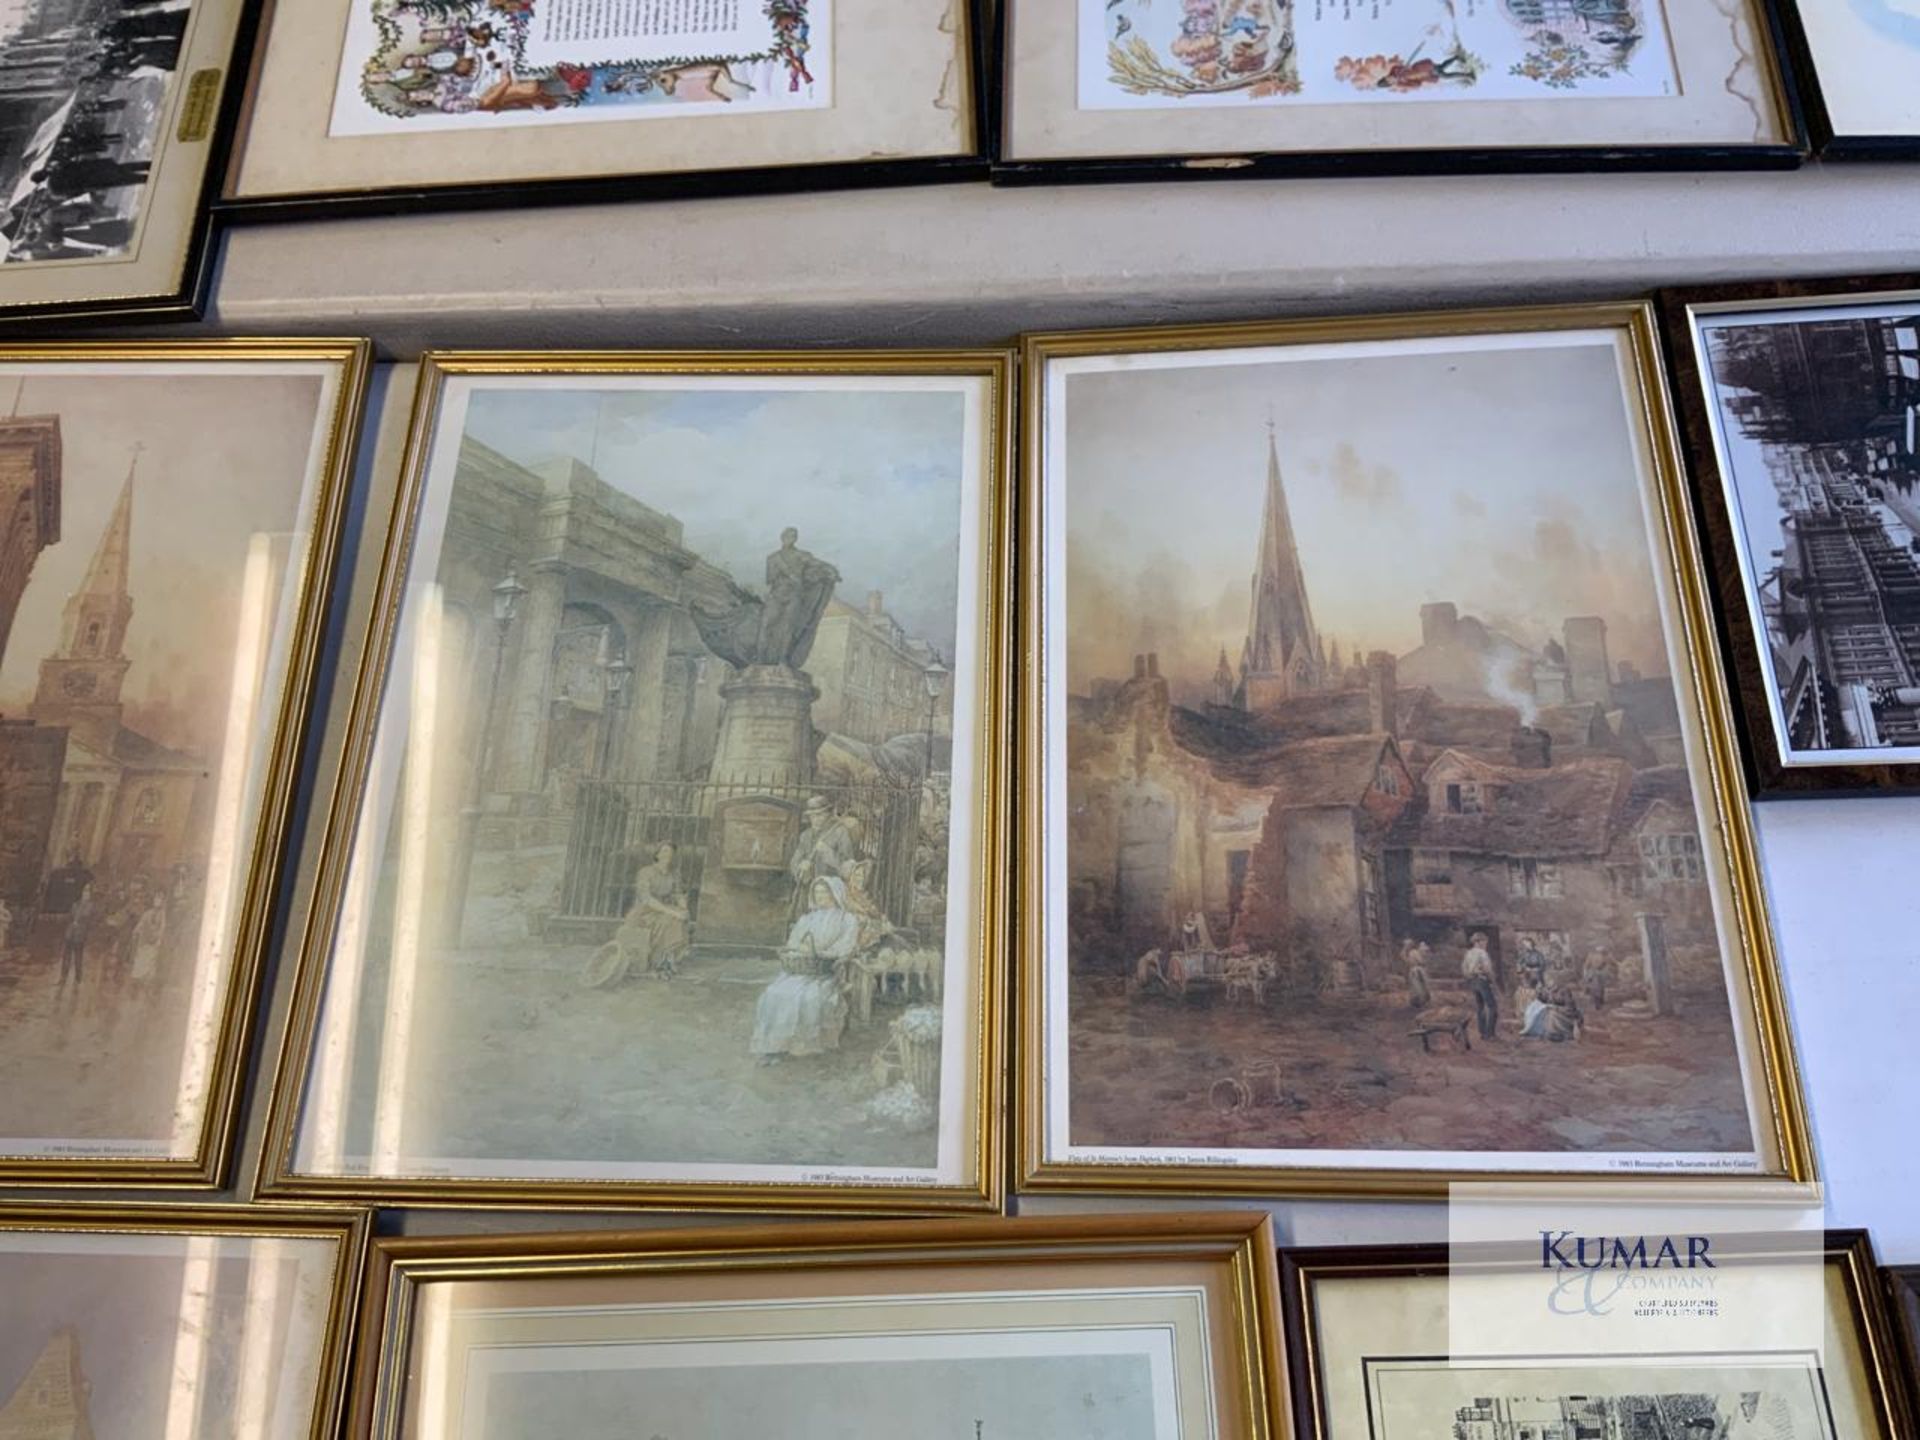 23: Various Pictures, Paintings, Drawings Etc - As Shown Many Historic Images of Birmingham by James - Image 10 of 26